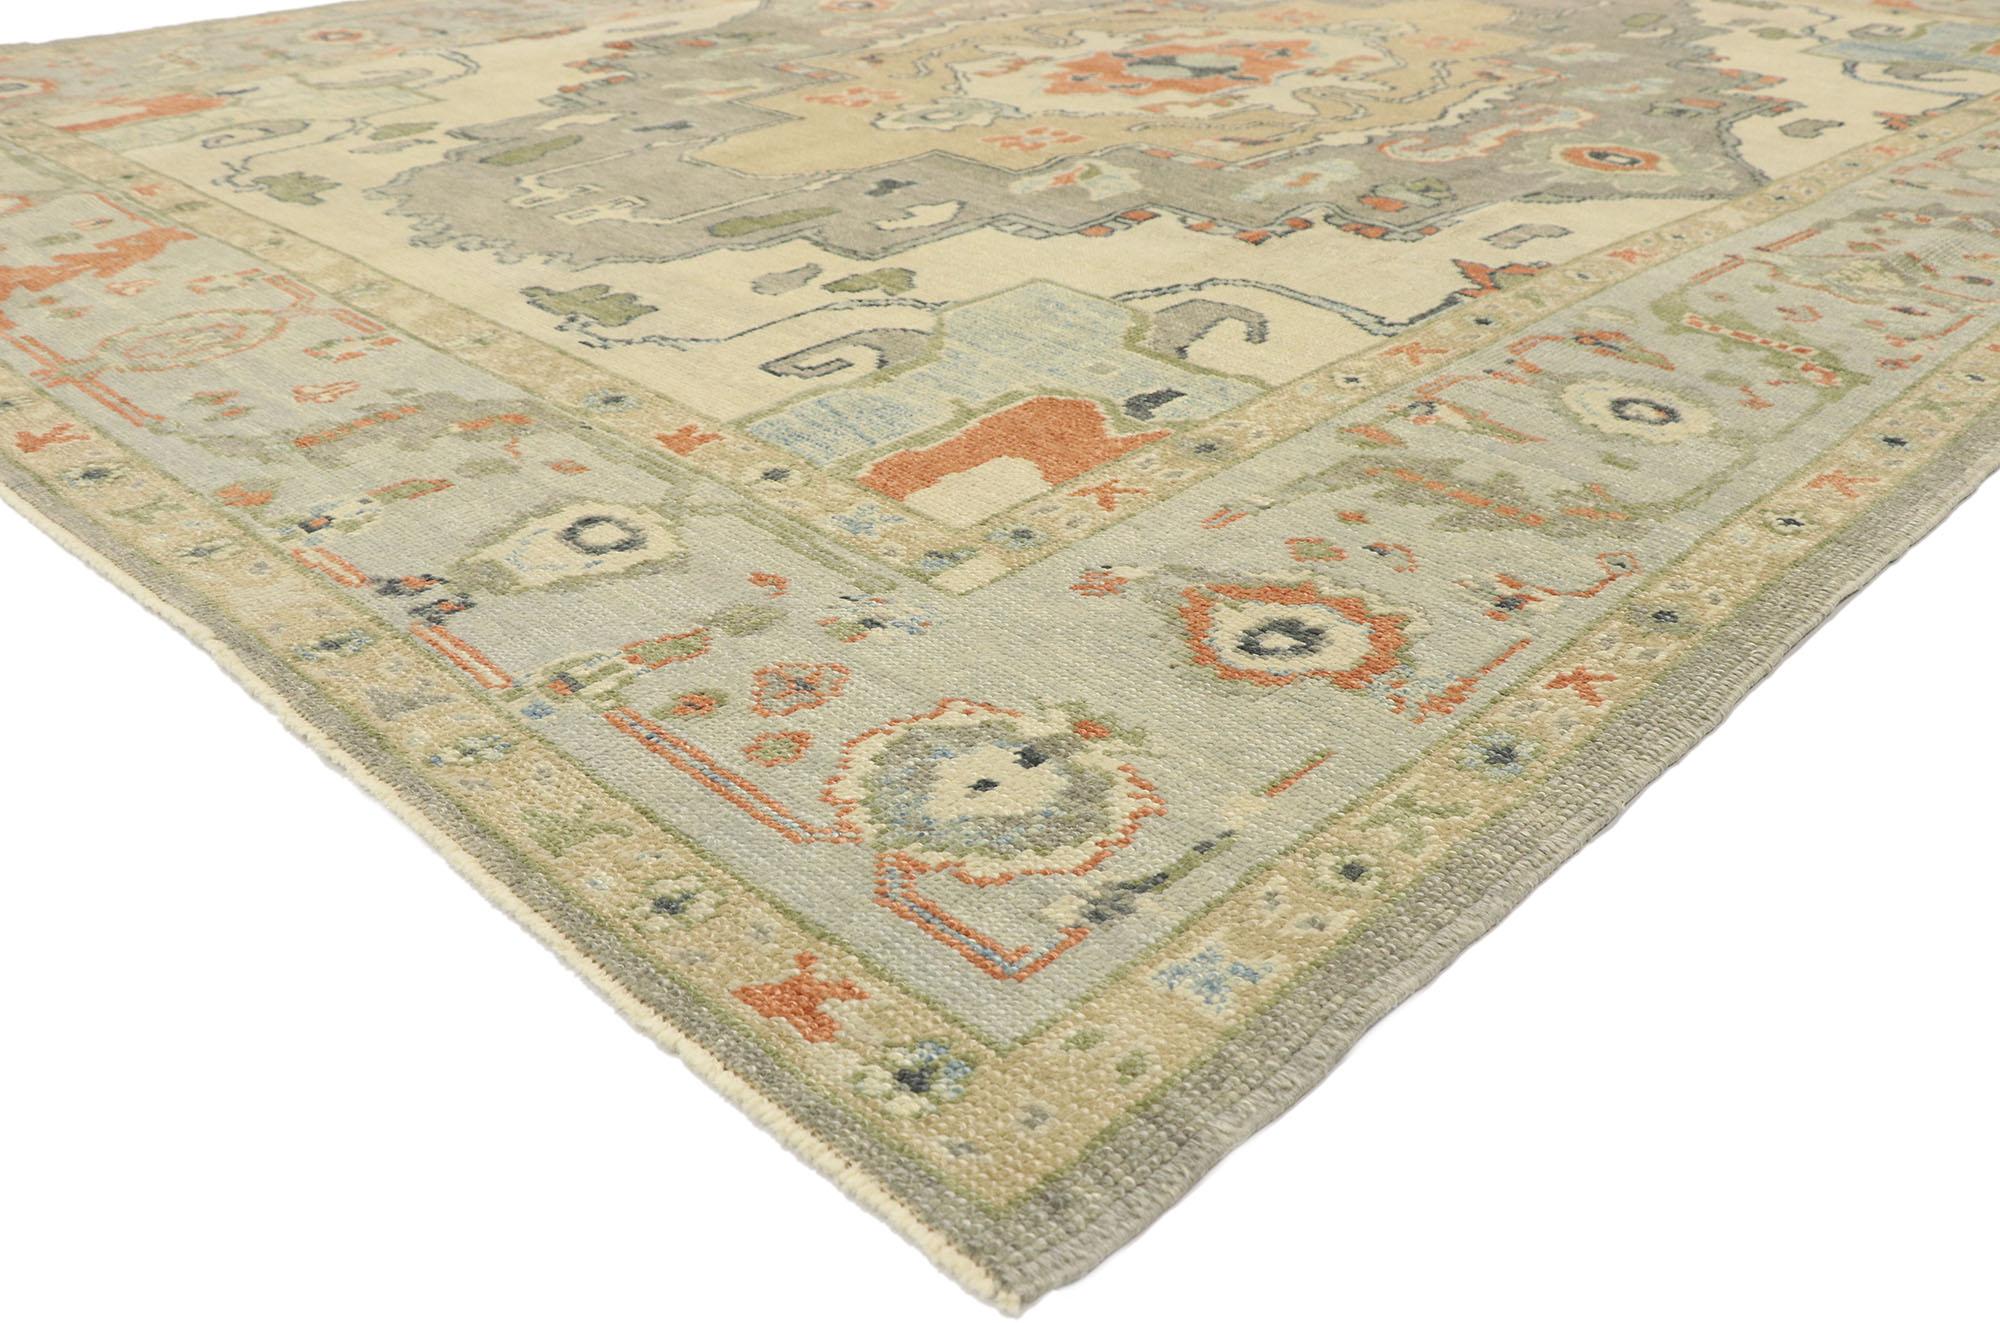 52873 New Contemporary Turkish Oushak Rug with Modern Transitional style. Blending elements from the modern world with hues in harmony, this hand knotted wool contemporary Turkish Oushak rug will boost the coziness factor in nearly any space. The